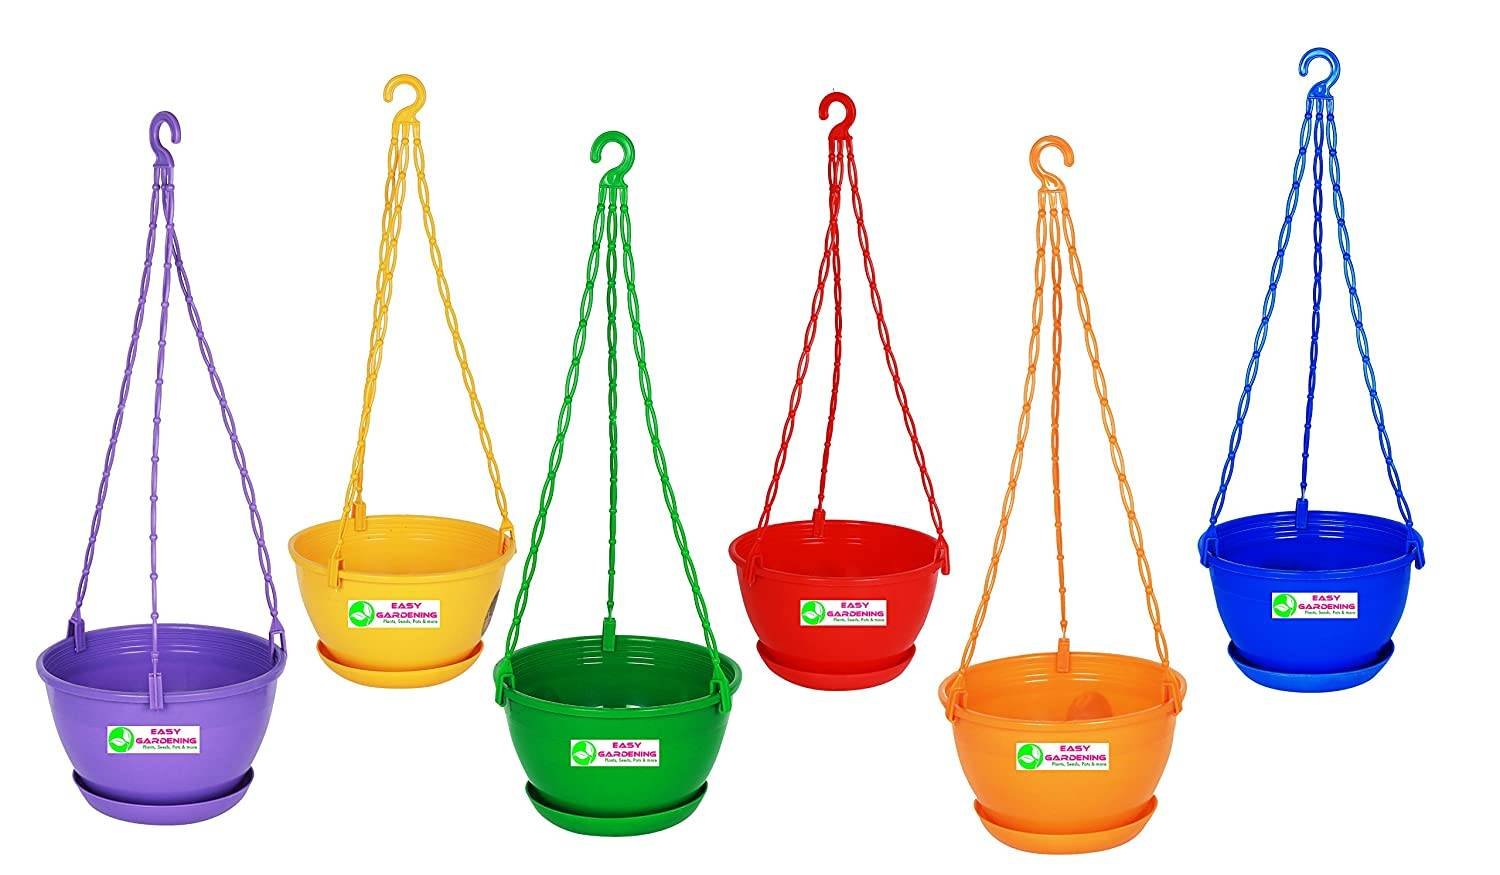 Easy Gardening Hanging Pots And Planters Pack Of 6